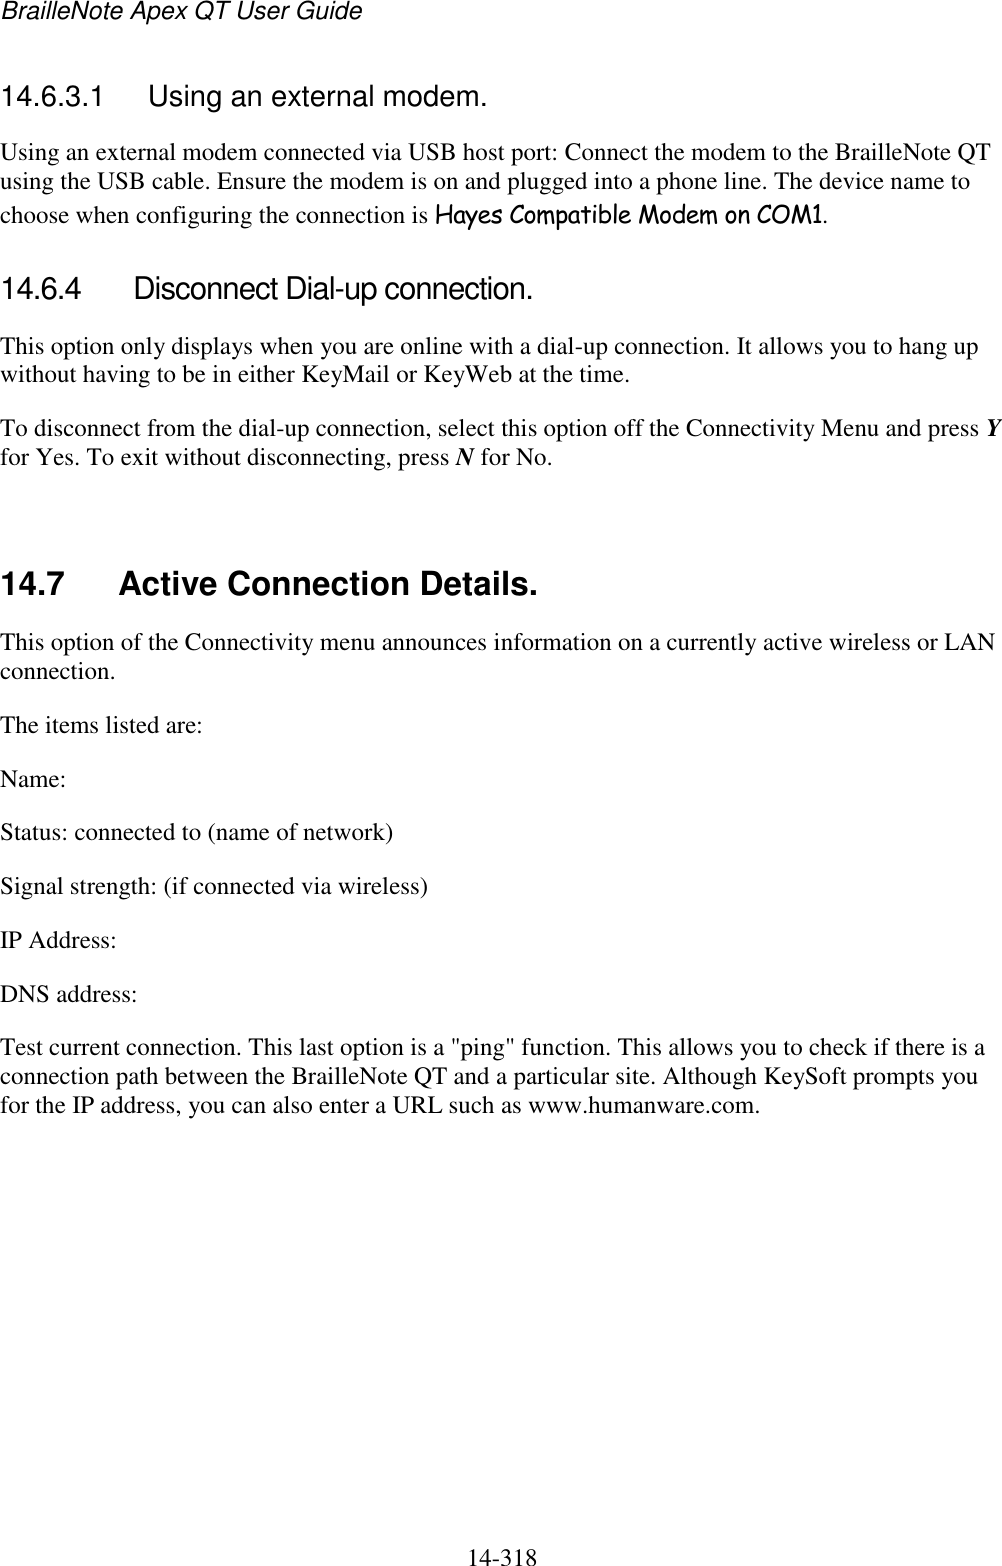 BrailleNote Apex QT User Guide  14-318   14.6.3.1  Using an external modem. Using an external modem connected via USB host port: Connect the modem to the BrailleNote QT using the USB cable. Ensure the modem is on and plugged into a phone line. The device name to choose when configuring the connection is Hayes Compatible Modem on COM1.  14.6.4  Disconnect Dial-up connection. This option only displays when you are online with a dial-up connection. It allows you to hang up without having to be in either KeyMail or KeyWeb at the time. To disconnect from the dial-up connection, select this option off the Connectivity Menu and press Y for Yes. To exit without disconnecting, press N for No.   14.7  Active Connection Details. This option of the Connectivity menu announces information on a currently active wireless or LAN connection. The items listed are: Name: Status: connected to (name of network) Signal strength: (if connected via wireless) IP Address: DNS address: Test current connection. This last option is a &quot;ping&quot; function. This allows you to check if there is a connection path between the BrailleNote QT and a particular site. Although KeySoft prompts you for the IP address, you can also enter a URL such as www.humanware.com.   